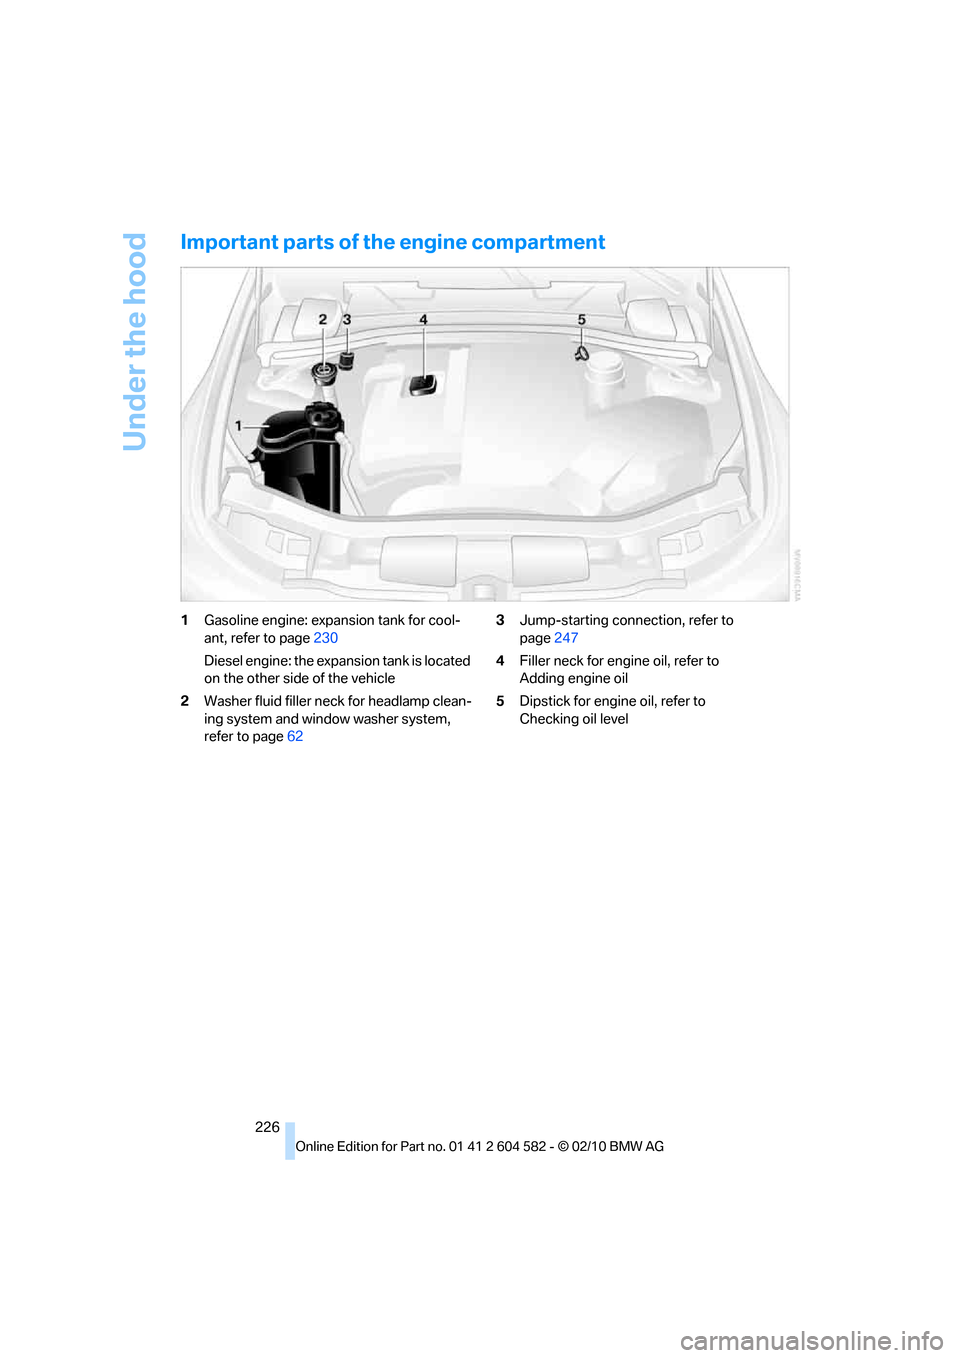 BMW 323I 2011 E90 Owners Manual Under the hood
226
Important parts of the engine compartment
1Gasoline engine: expansion tank for cool-
ant, refer to page230
Diesel engine: the expansion tank is located 
on the other side of the veh